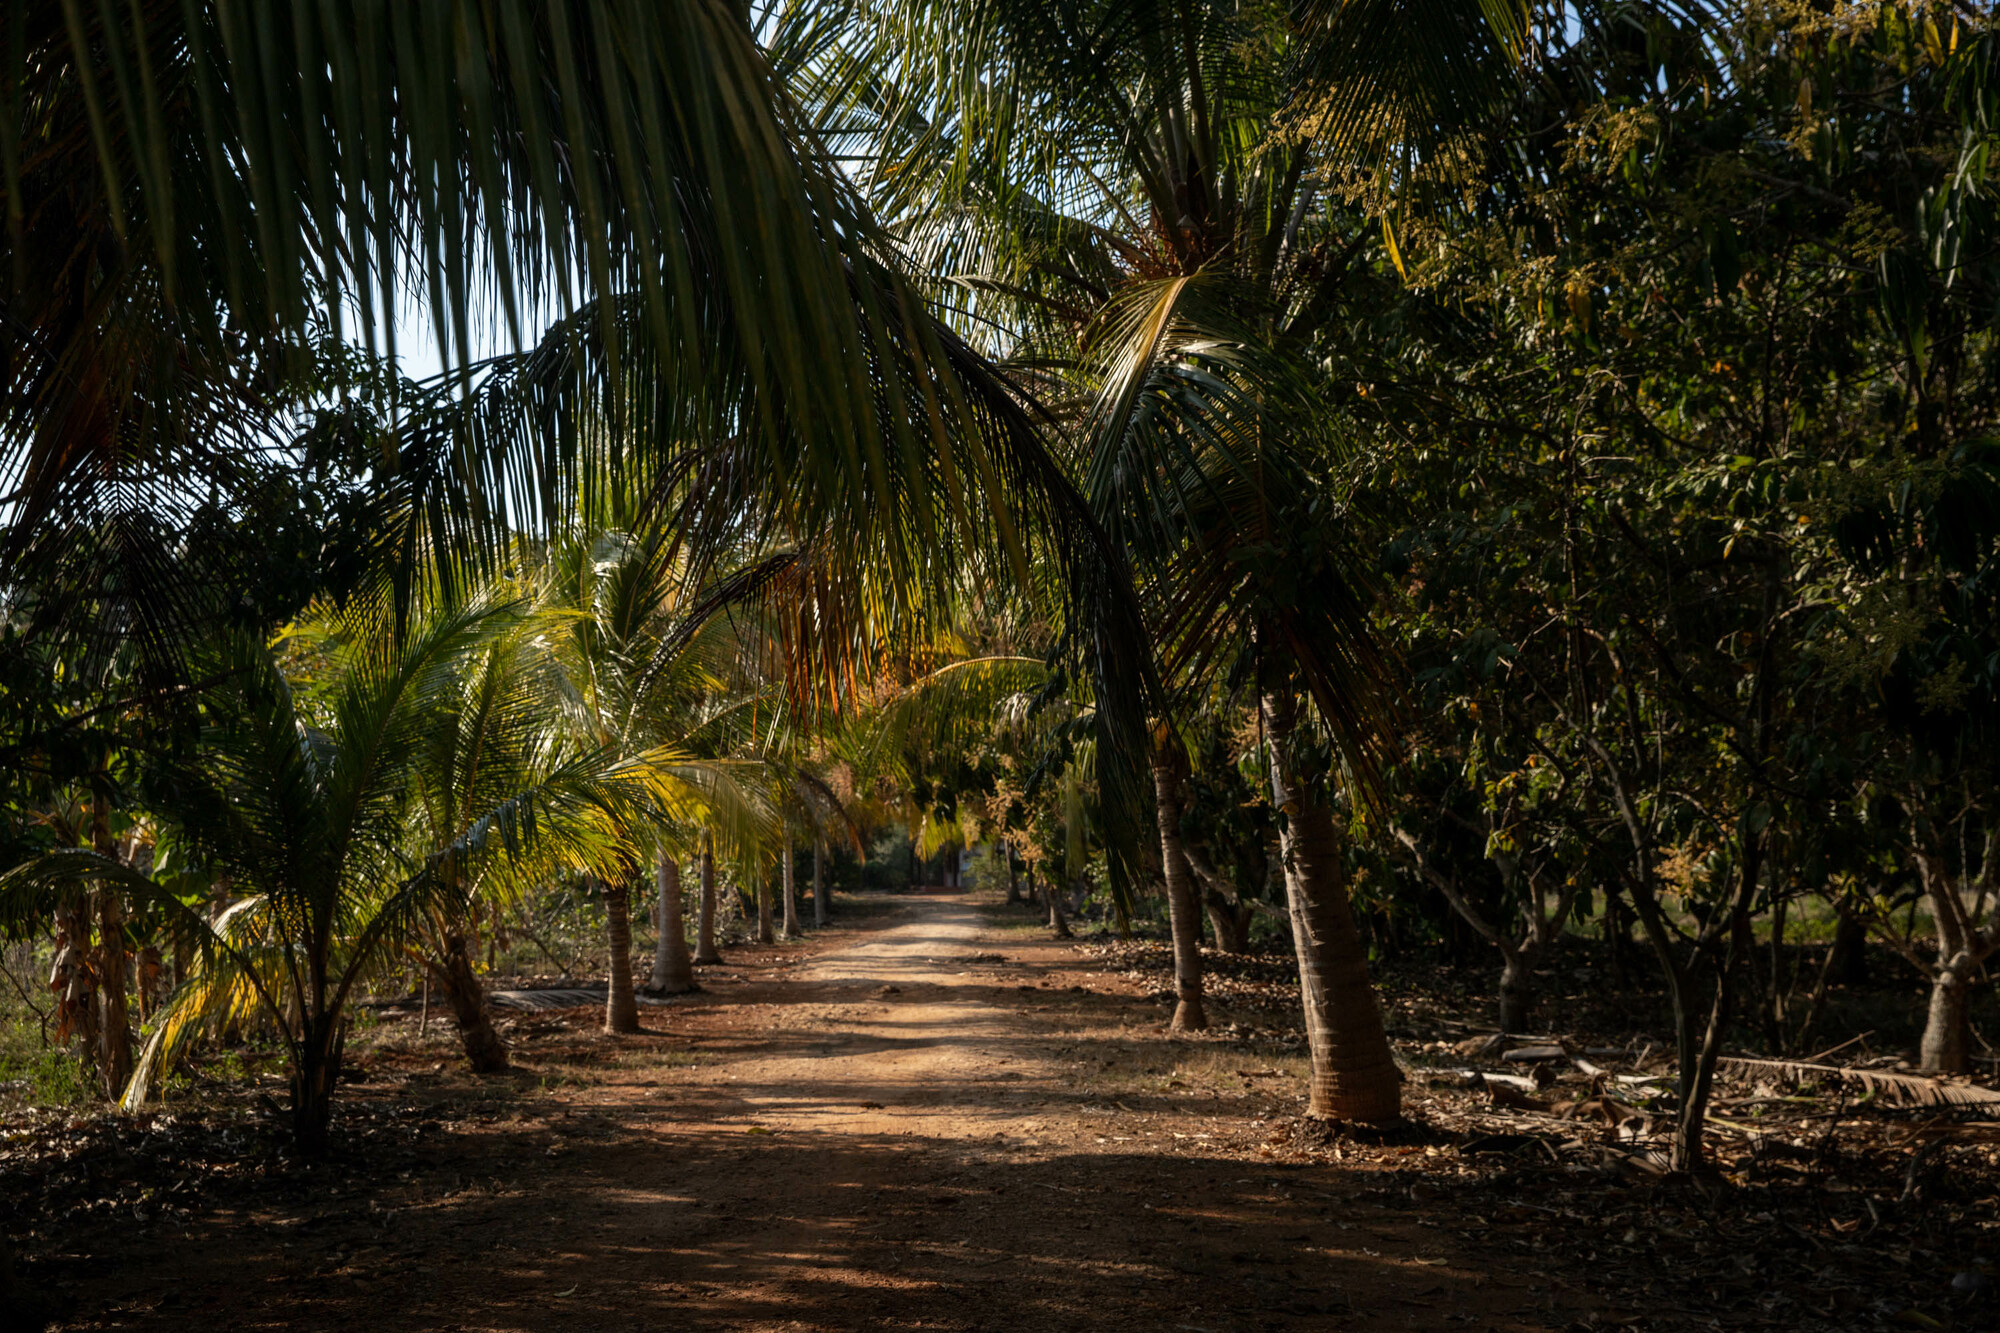 A view of a road surrounded in palm trees